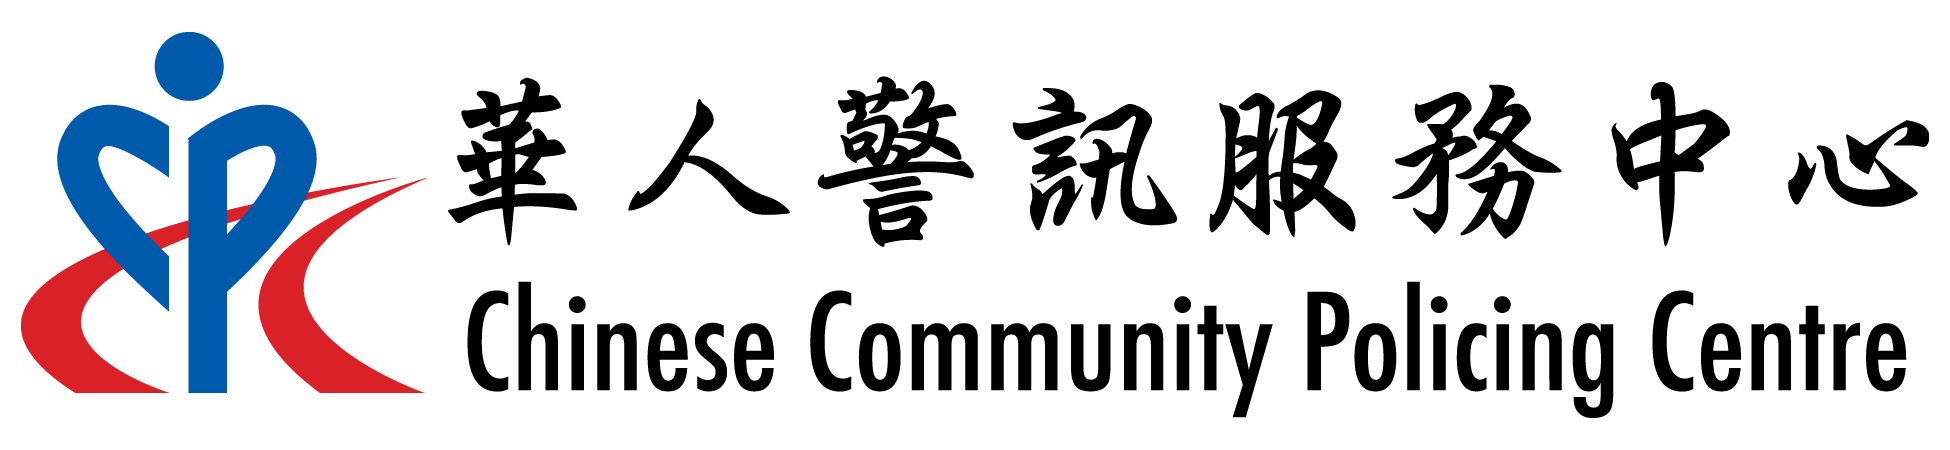 Chinese Community Policing Centre Logo